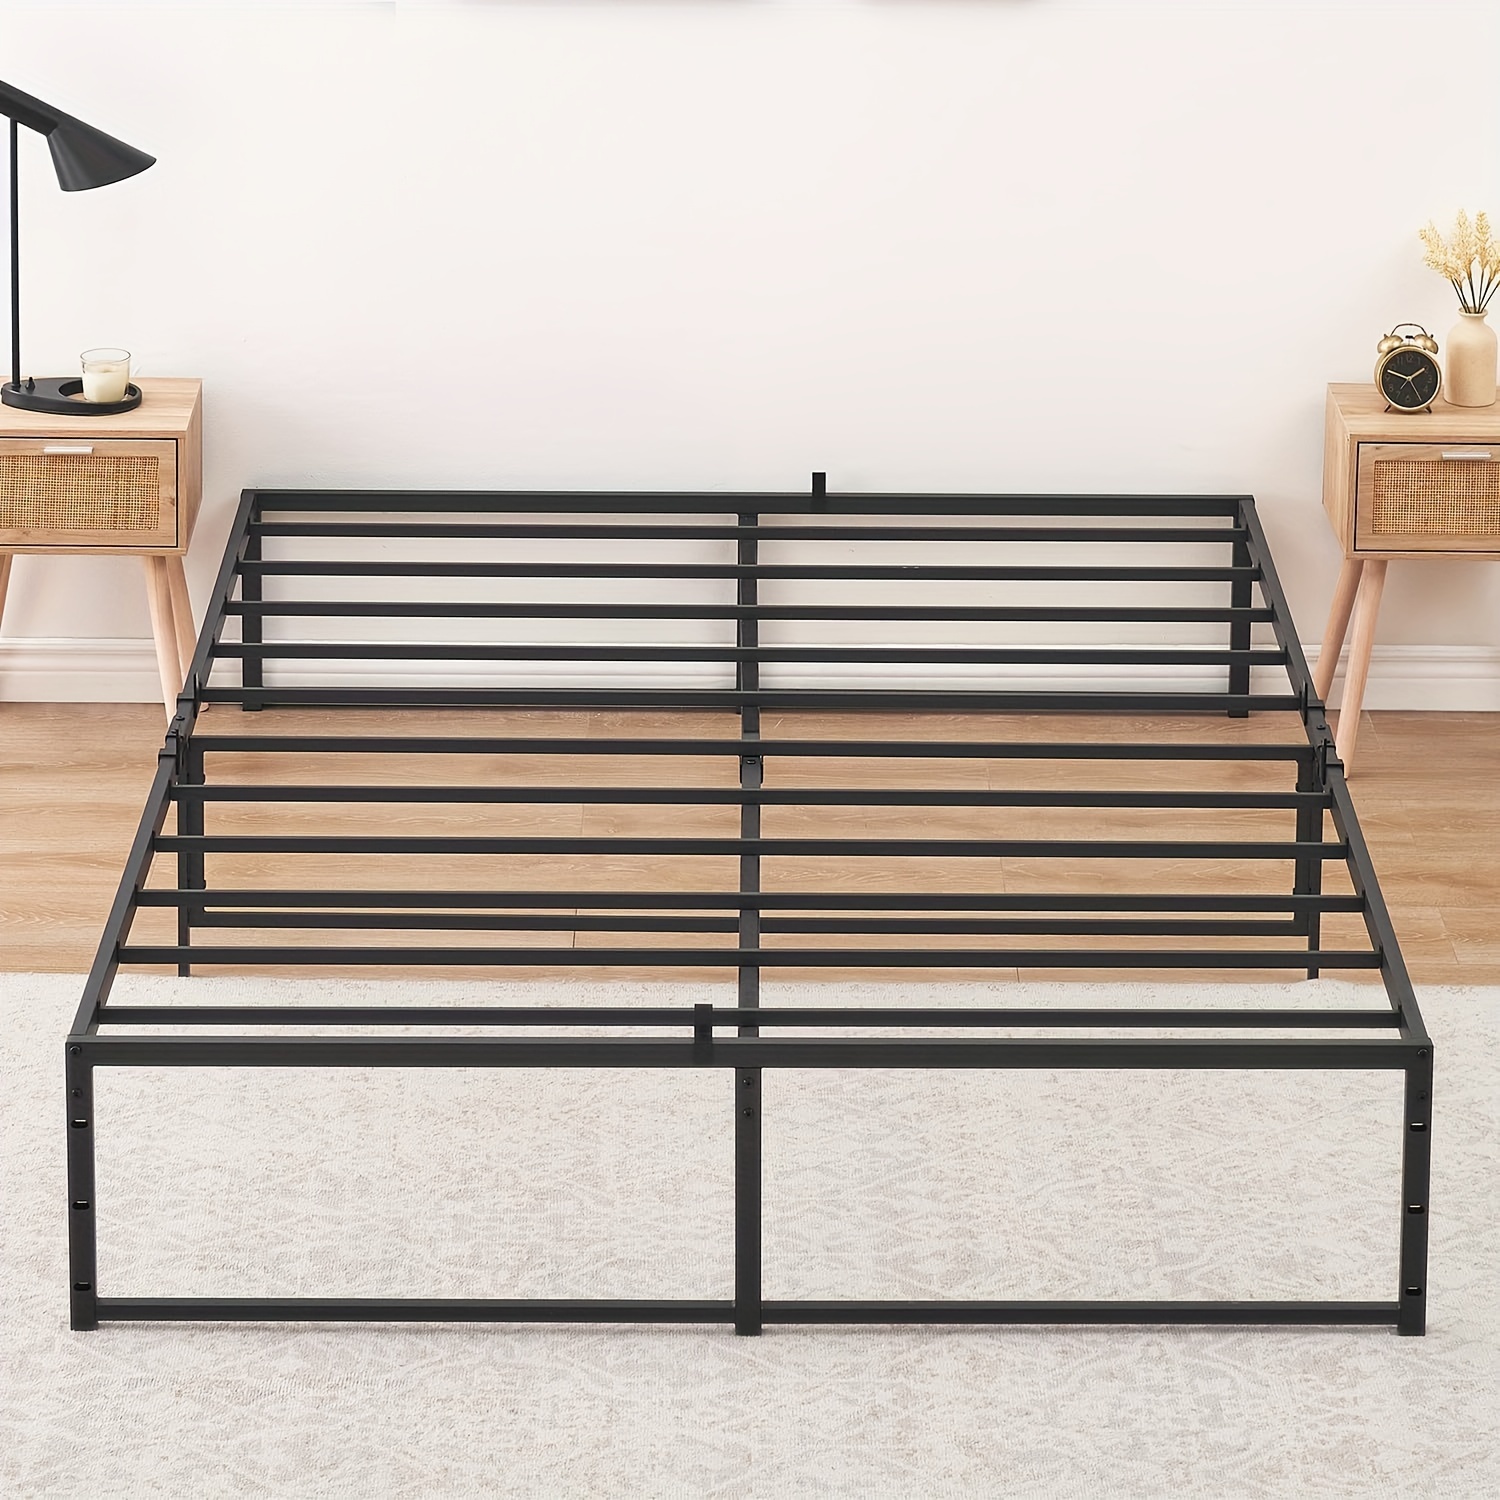 

1pc Metal Bed Frame, Platform Bed Frame 13 Inch With 3 In 1 Steel Support, Heavy Duty Metal Platform Bed Frame, No Box Spring Needed, Easy To Assemble, Black